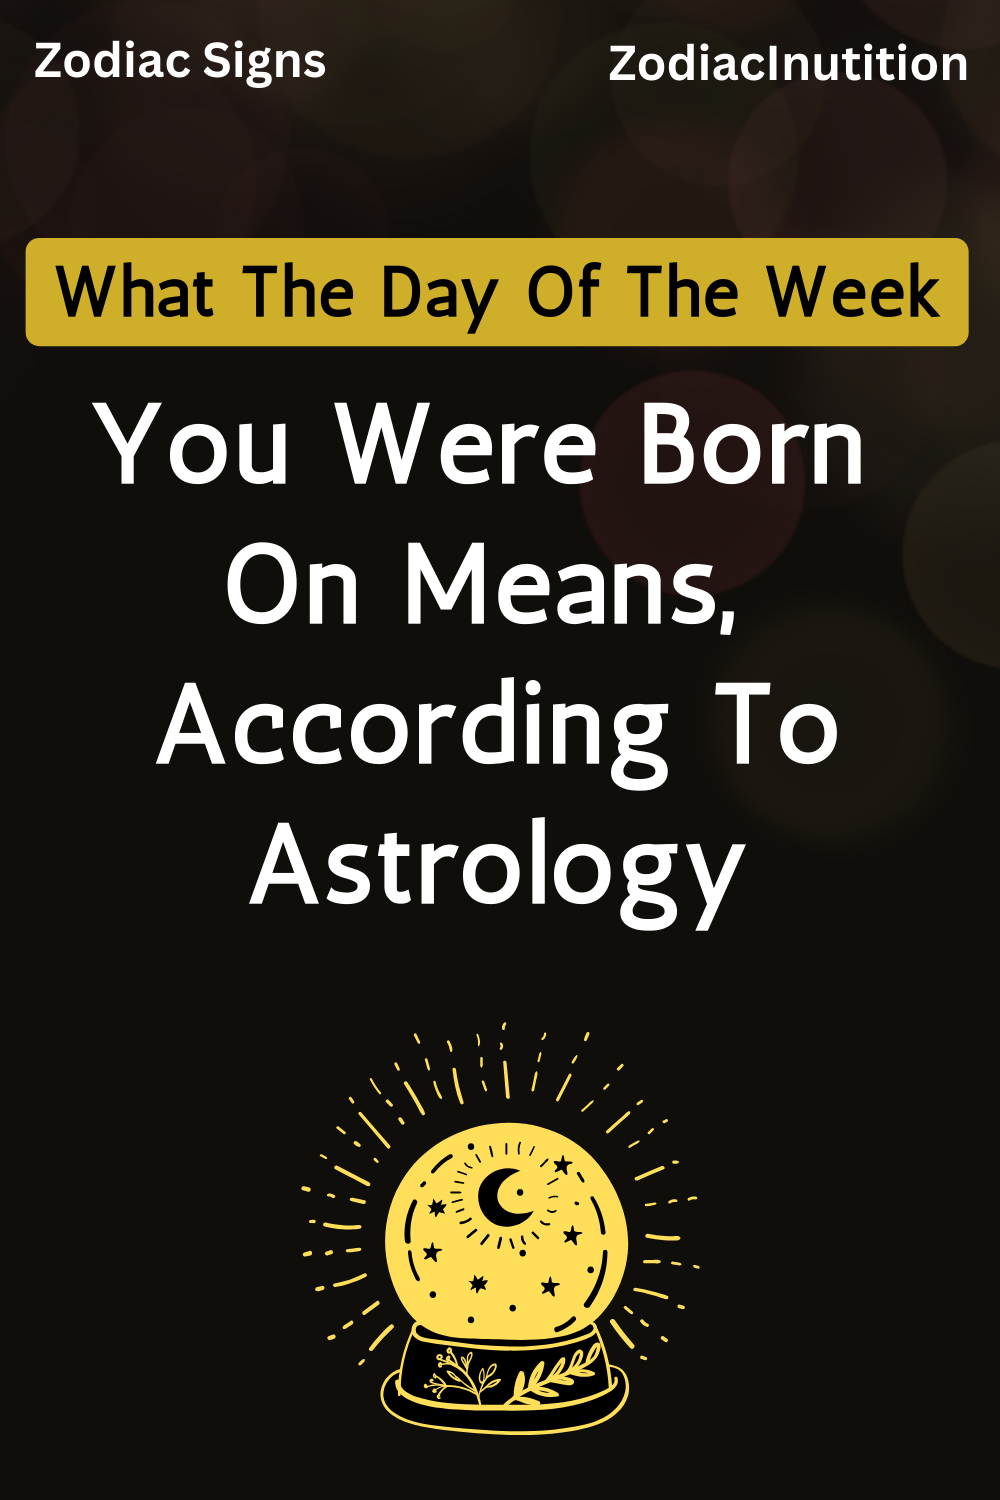 What The Day Of The Week You Were Born On Means, According To Astrology